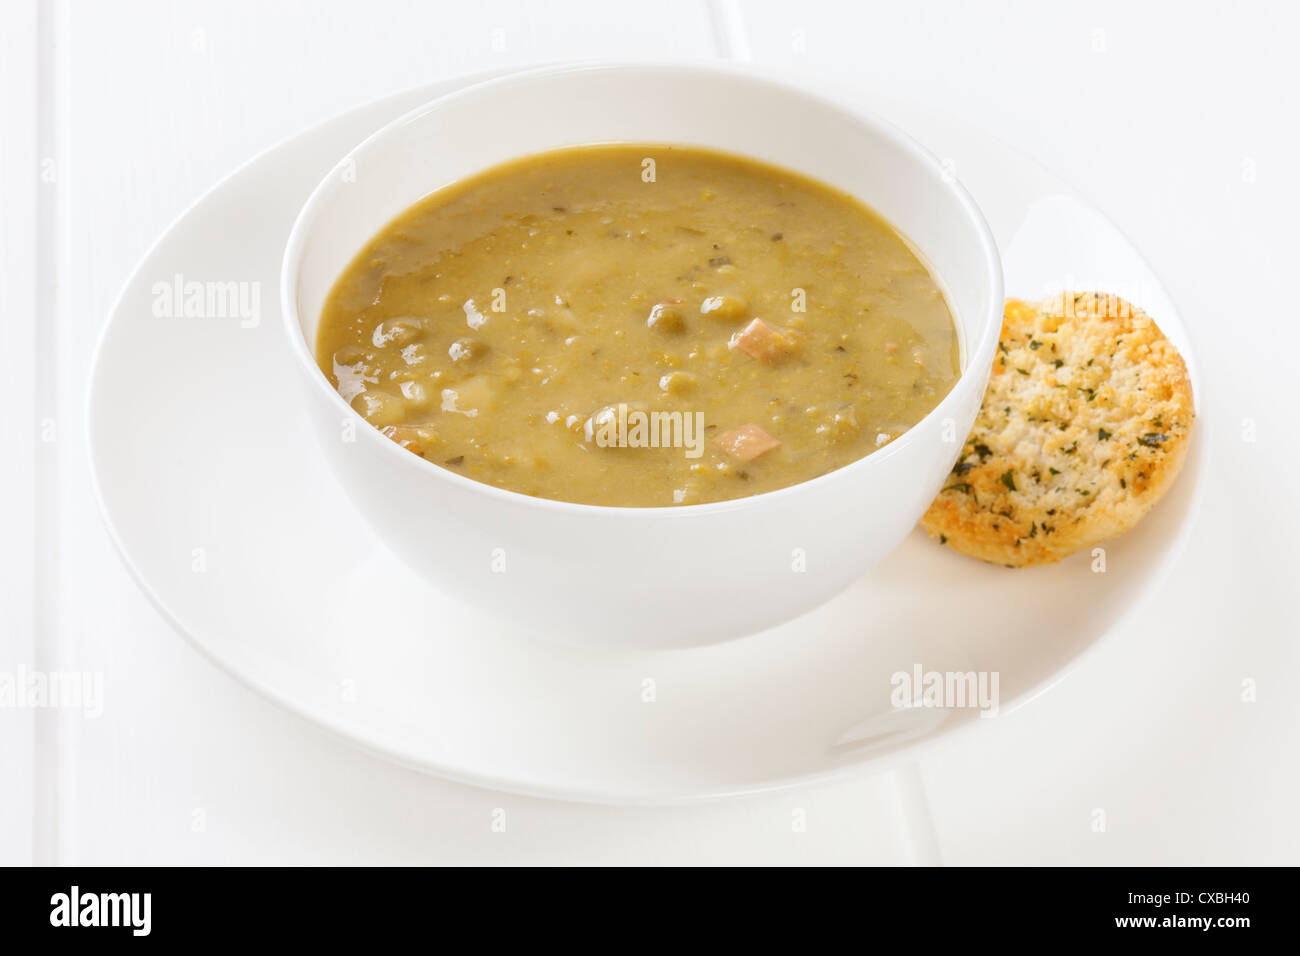 Small meal of half a can of pea and ham soup with one garlic toast. Total calories 180, or 754 kilojoules. Stock Photo